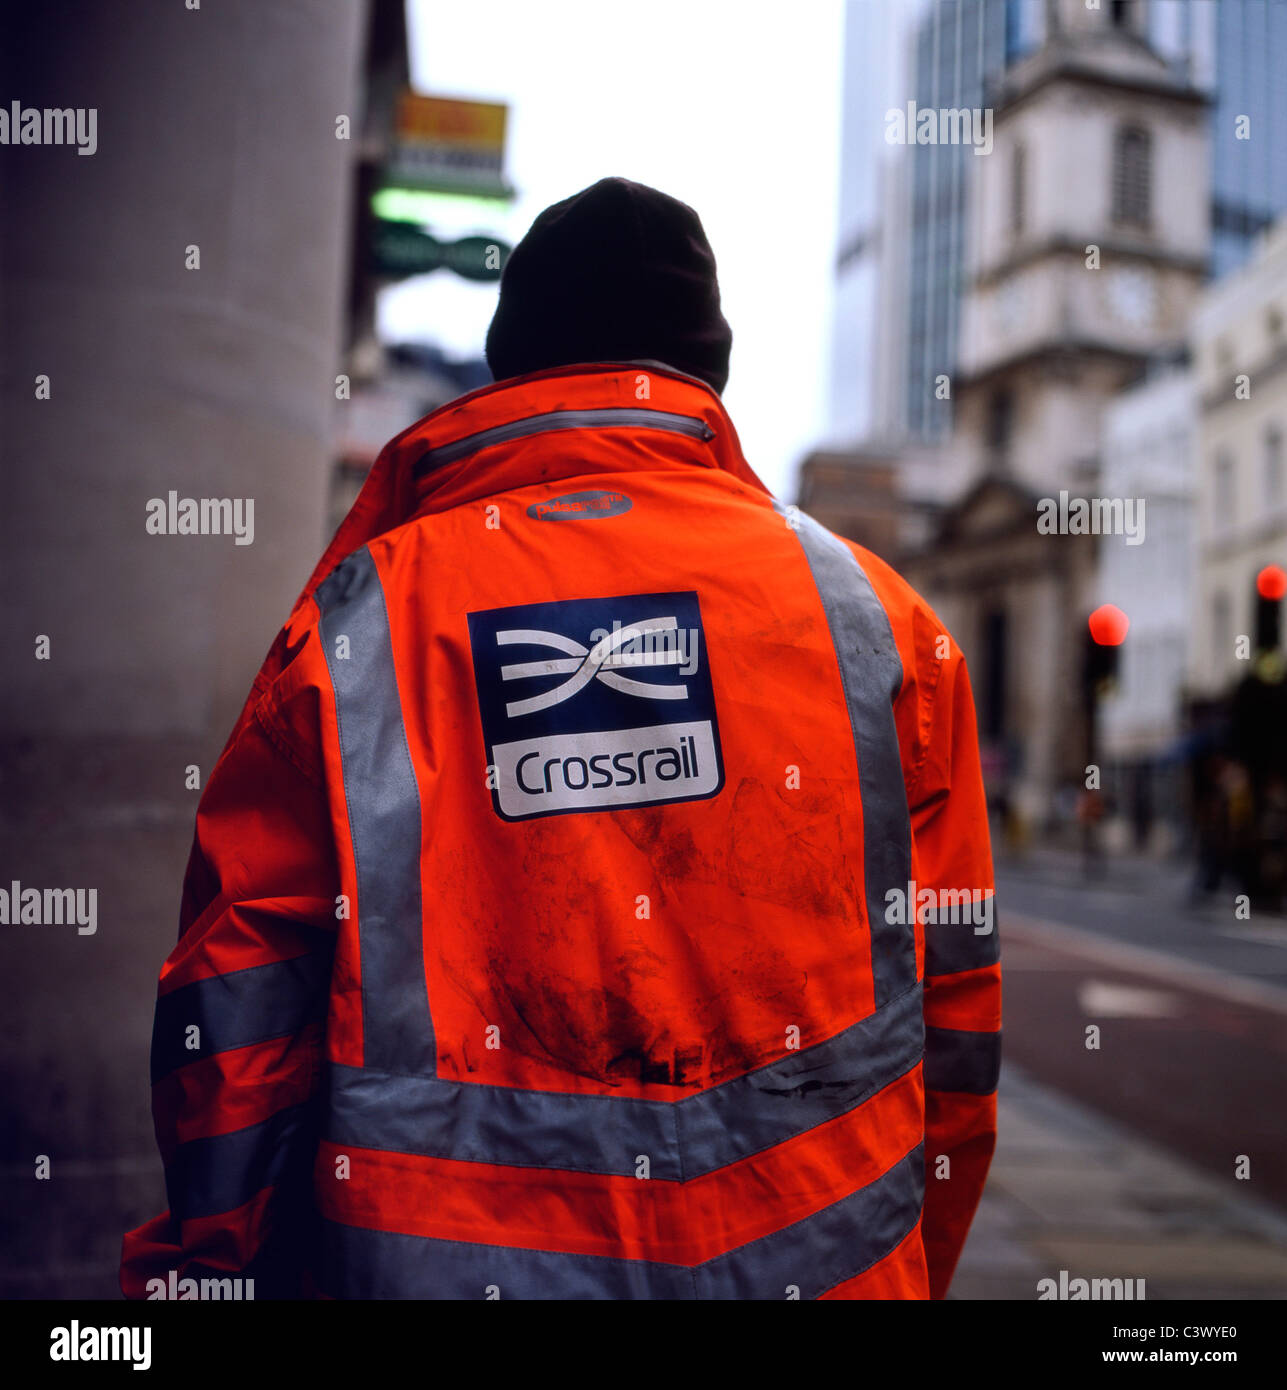 Back view a Crossrail logo on an underground worker jacket working along Bishopsgate Street in the City of London UK   KATHY DEWITT Stock Photo